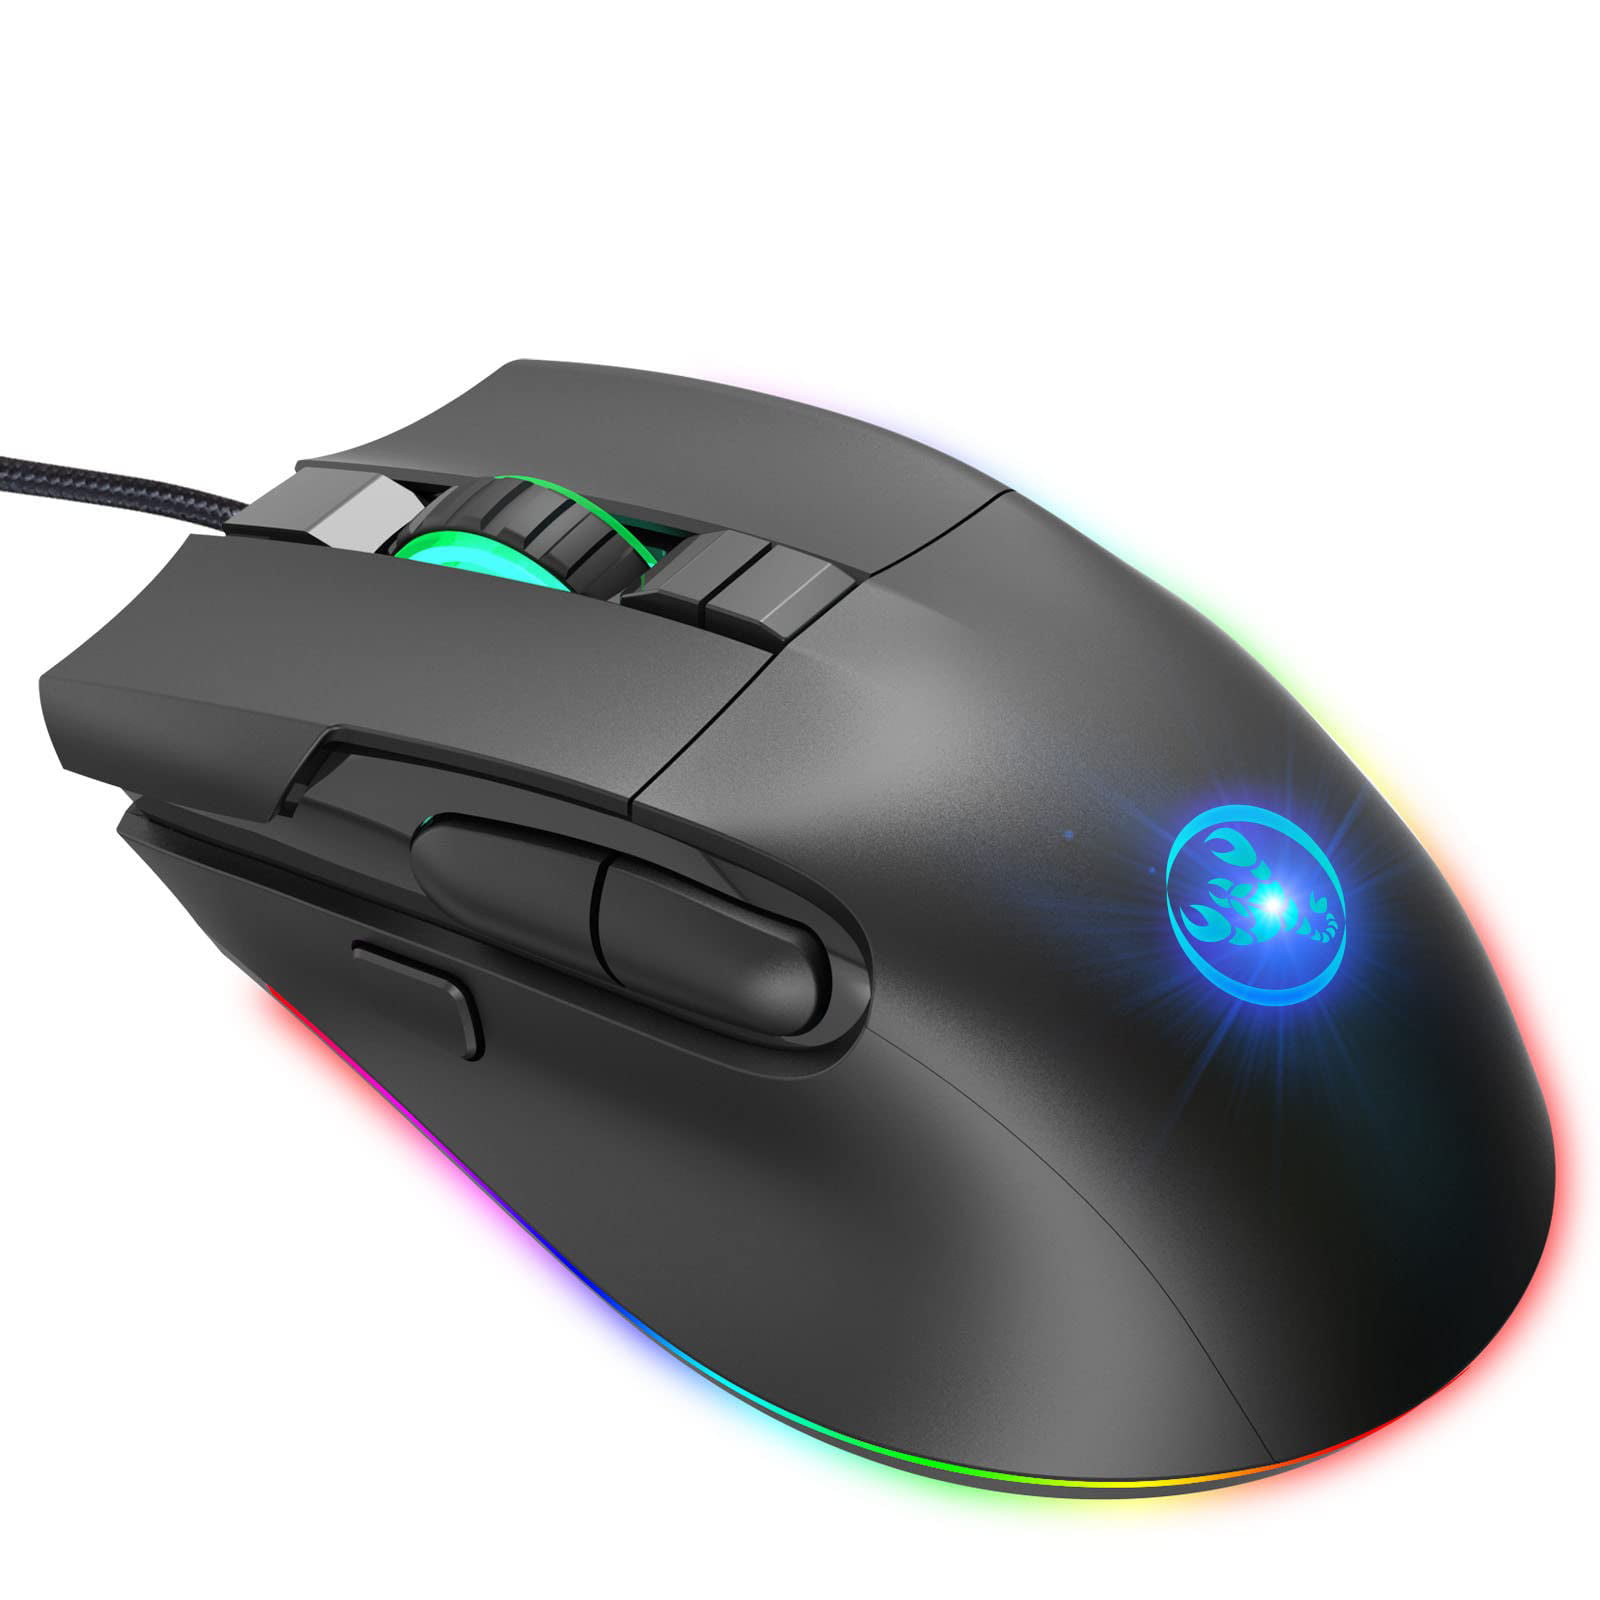 5000 DPI GX Gaming Mouse M6-600 7 color led USB Wired Optical Mouse for PC Black 